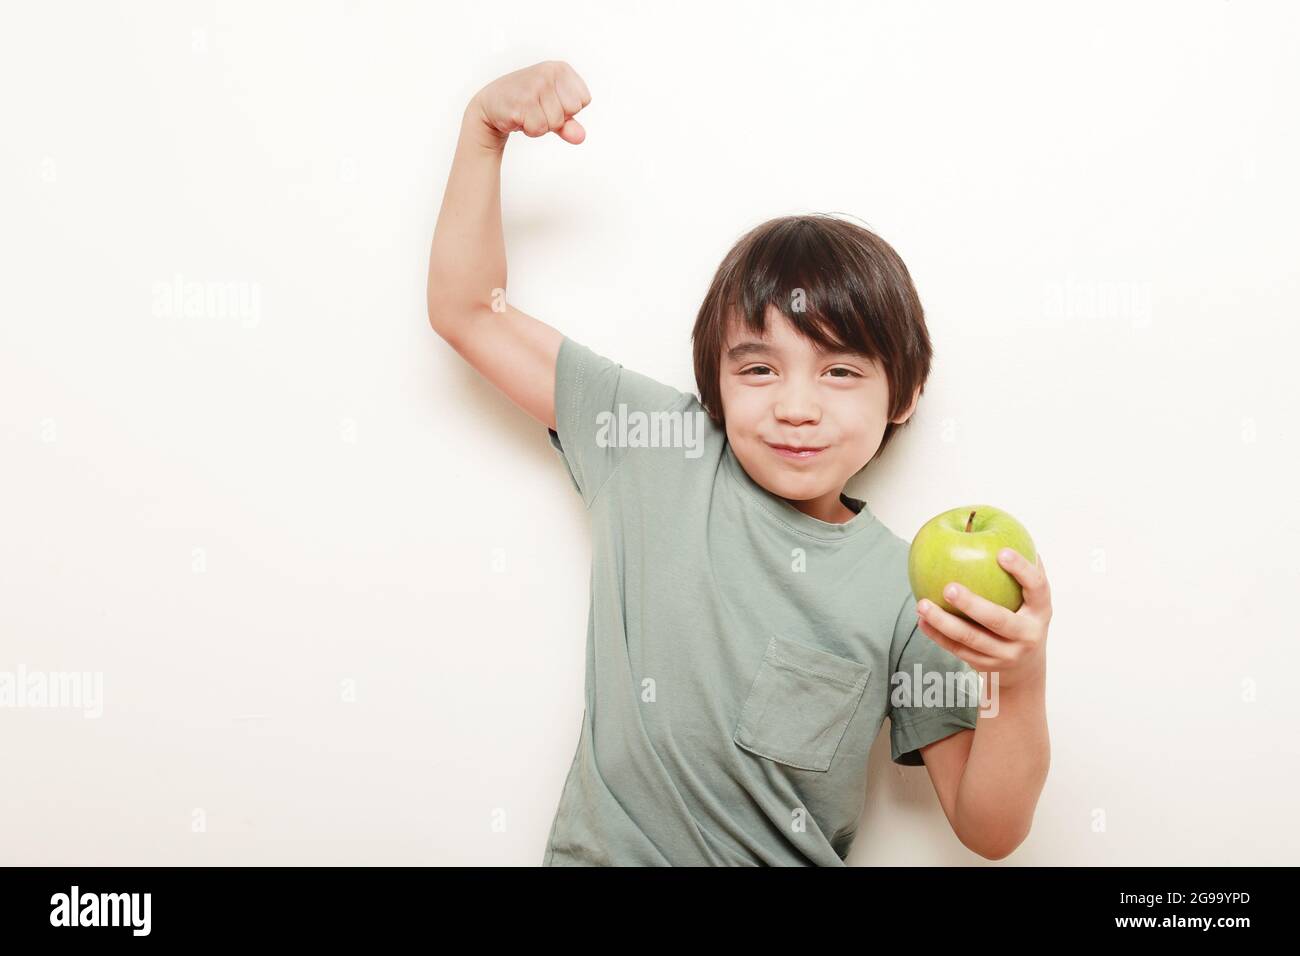 child on a white background eating the green apple he holds in one hand and with the other hand he shows us his bicep indicating strength Stock Photo